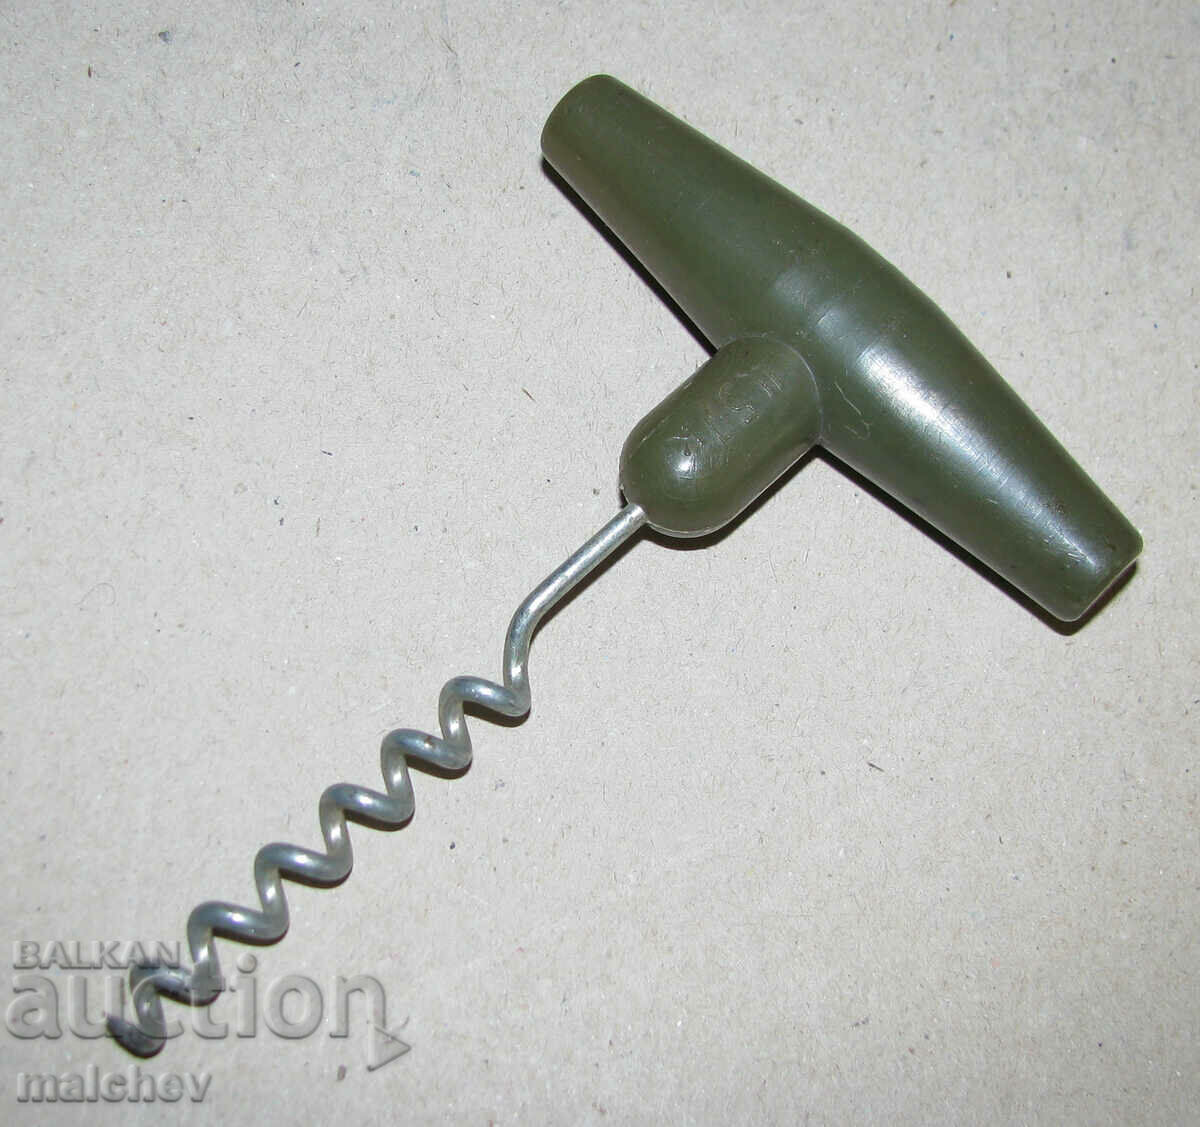 Old Russian corkscrew with plastic handle, excellent